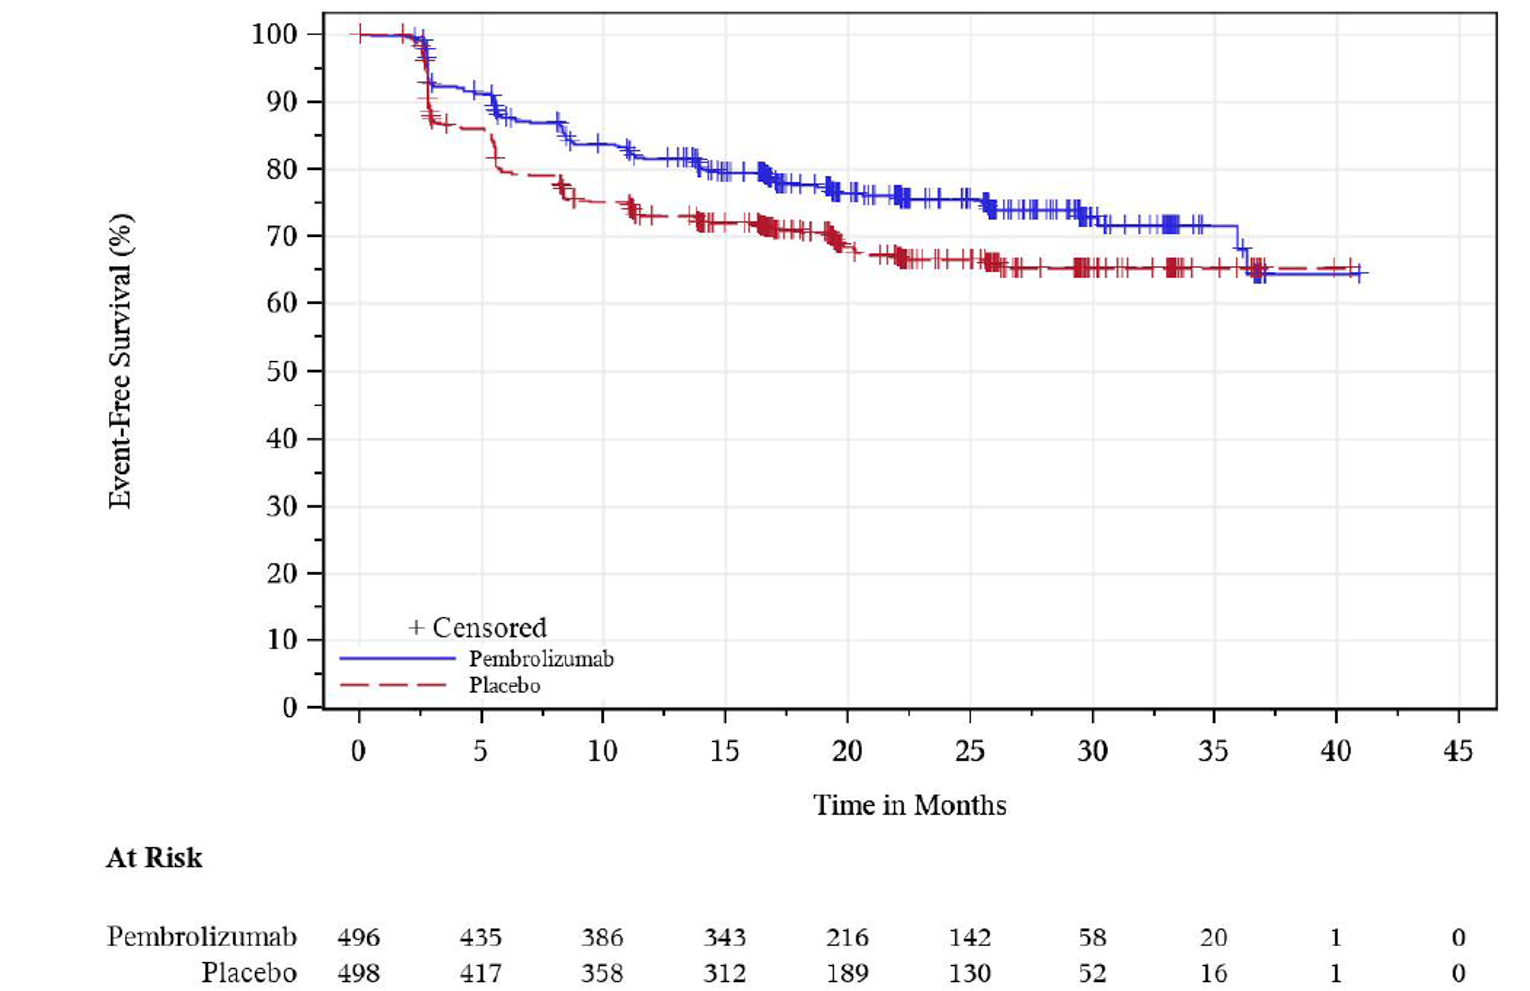 Kaplan-Meier analysis of event-free survival for patients enrolled in the KEYNOTE-564 trial, the number of at-risk patients receiving pembrolizumab at 0, 5, 10, 15, 20, 25, 30, 35, 40, and 45 months was 496, 435, 386, 343, 216, 142, 58, 20, 1, and 0, respectively. The number of at-risk patients receiving placebo at 0, 5, 10, 15, 20, 25, 30, 35, 40, and 45 months was 498, 417, 358, 312, 189, 130, 52, 16, 1, and 0, respectively.